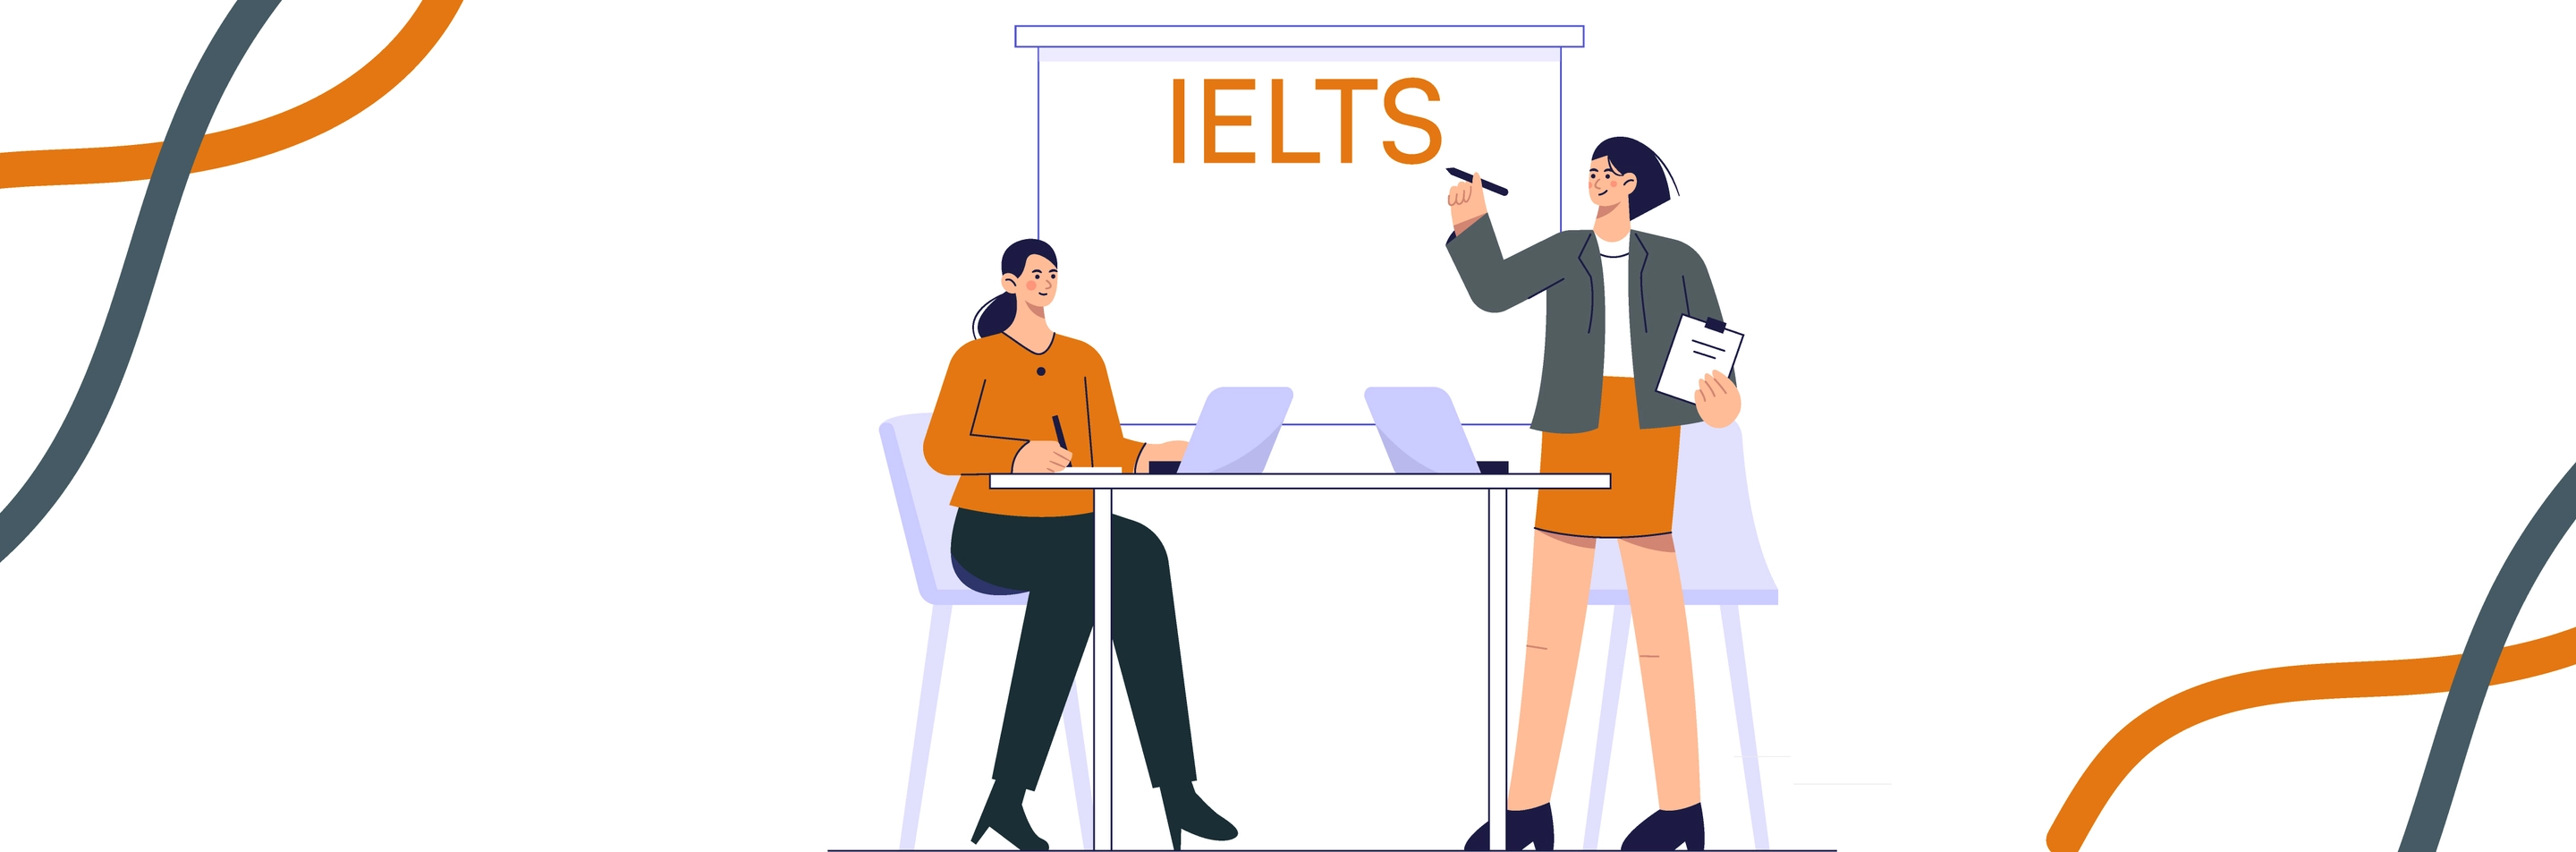 10 Best IELTS Institute in Amritsar: Get Trained from Experts at IELTS Coaching in Amritsar Image